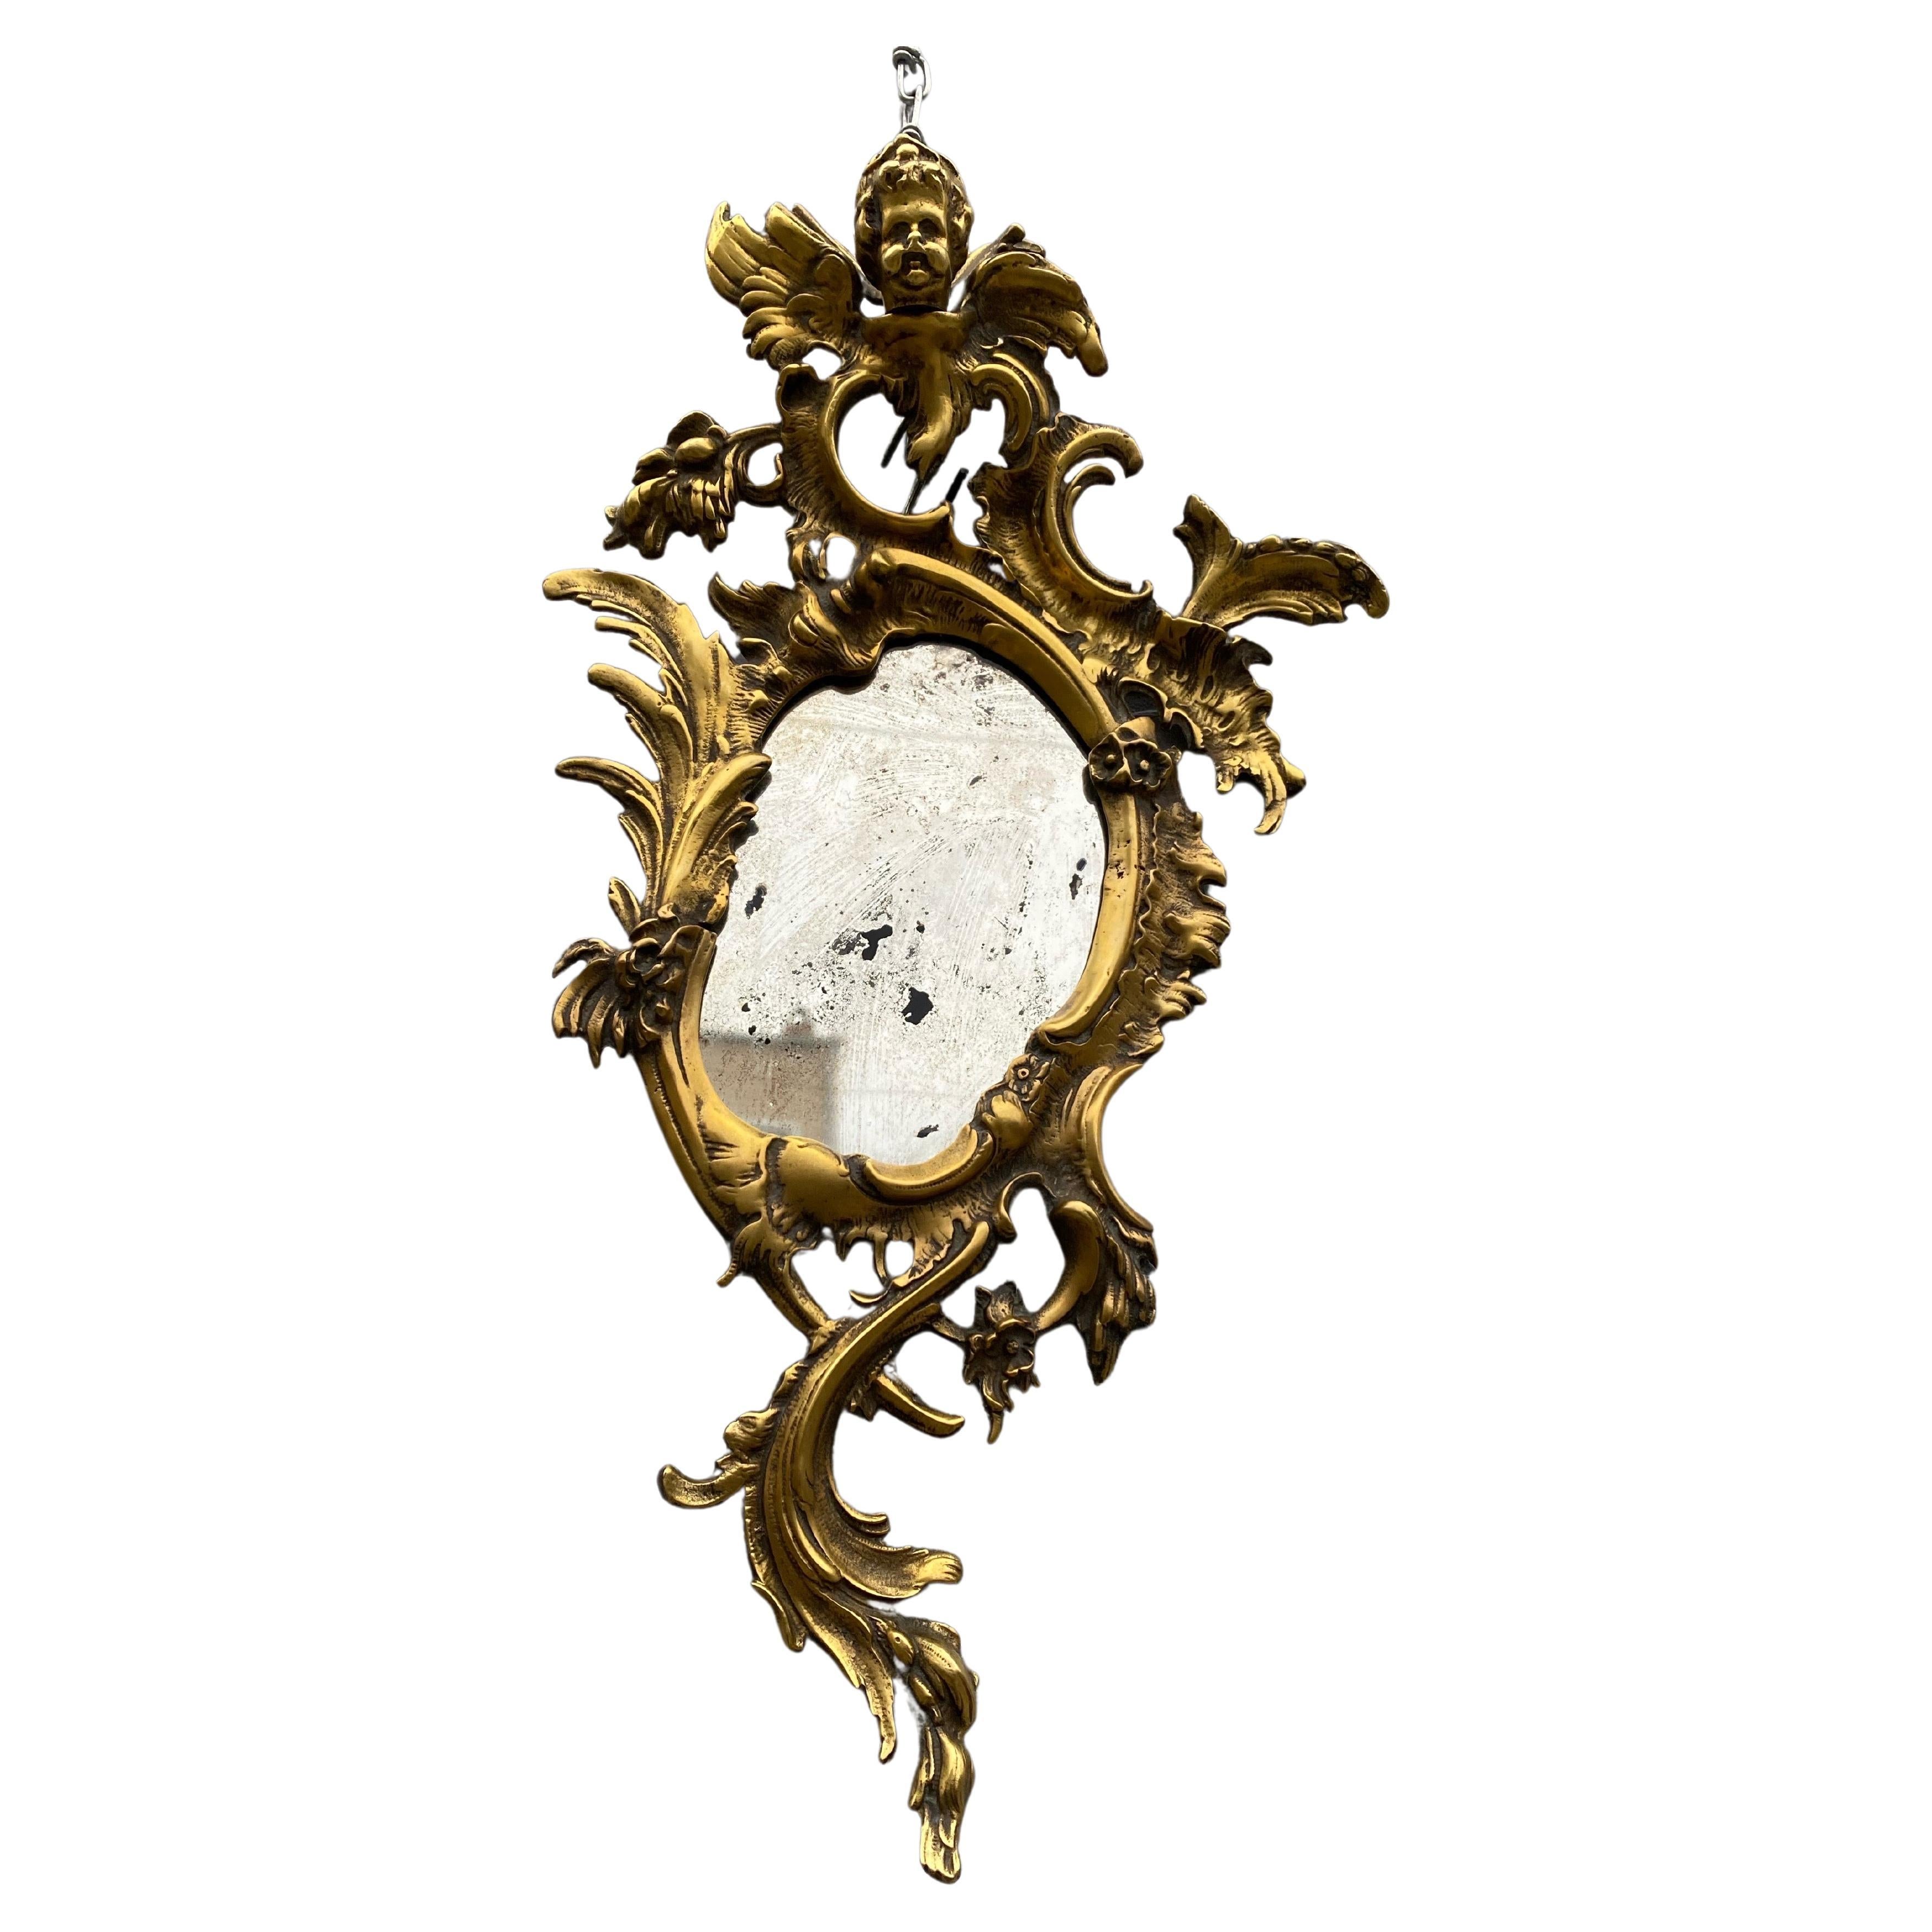 Antique Rococo figural bronze wall mirror.

This is a small bronze wall mirror featuring intertwined scrolls of acanthus leaves. It is embellished by a winged cherub bust as a finial.

circa 1880

Dimensions 

W 12”
H 23”

Mirror 

W